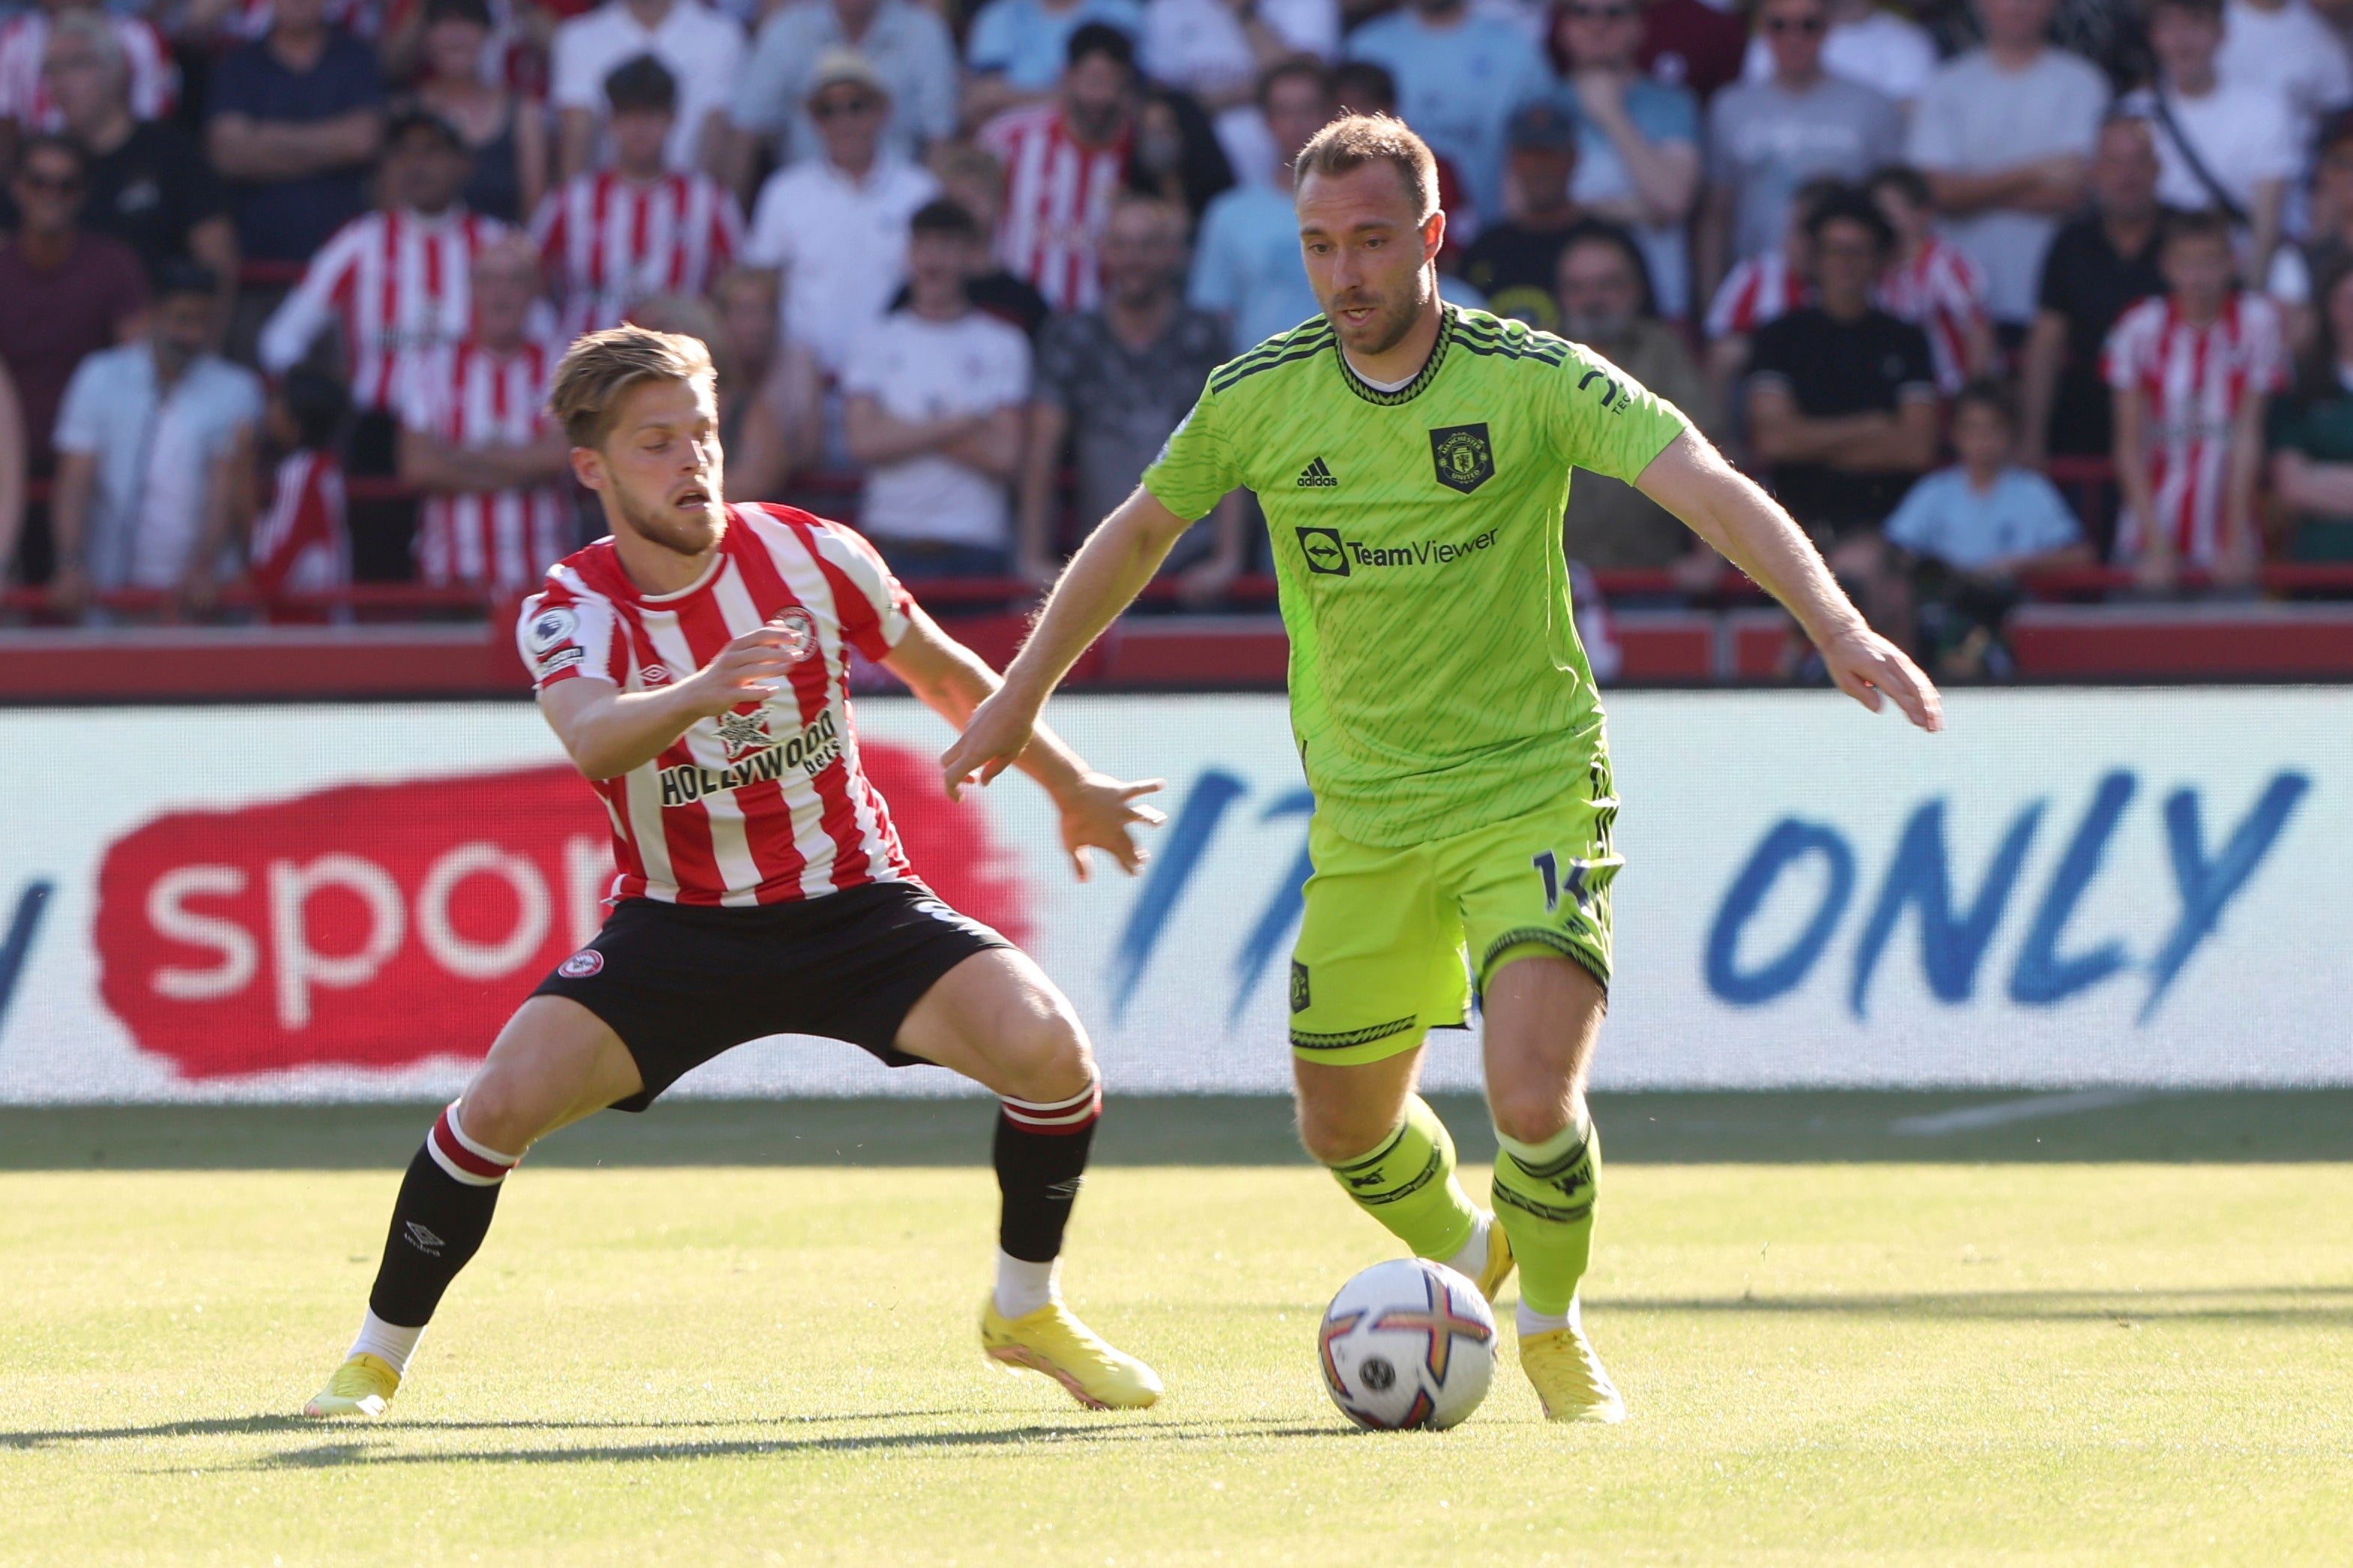 Christian Eriksen did not enjoy his return to Brentford but has improved dramatically